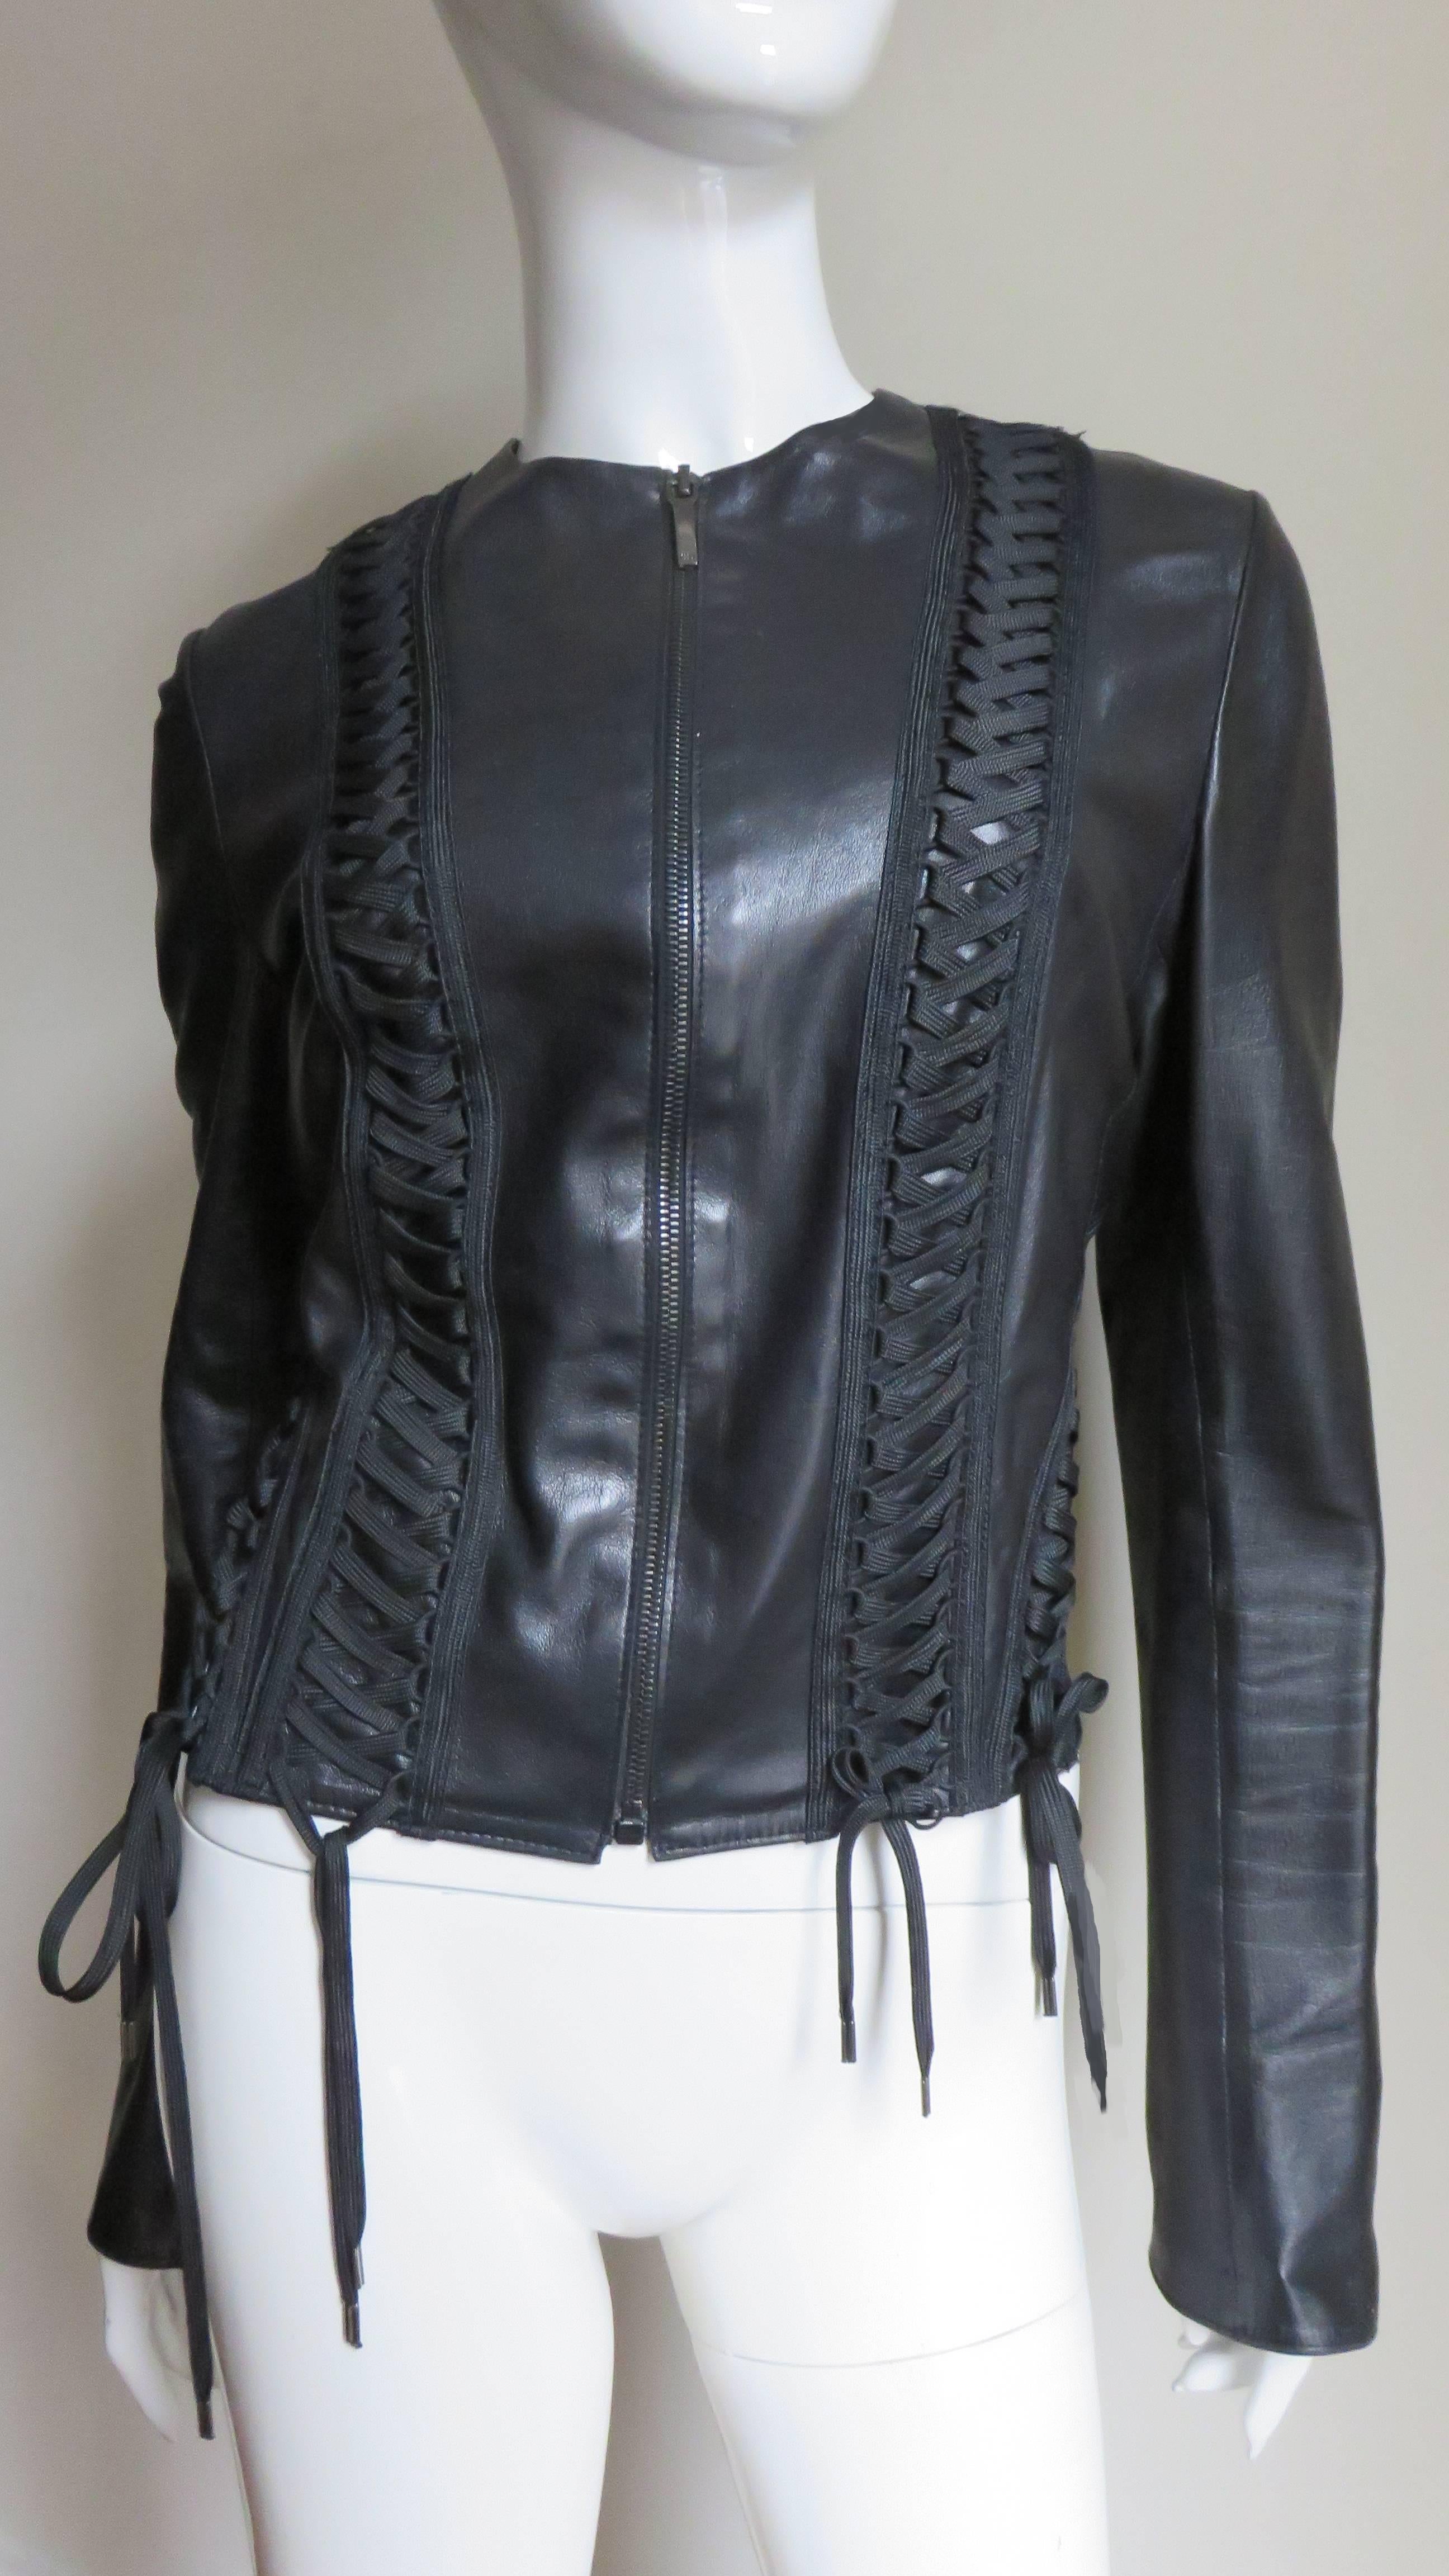 A fabulous soft fine black leather jacket by John Galliano for Christian Dior.  It has elaborate lacing detail along the entire length of the jacket on either side of the center front zipper and 4 rows in the back fanning out from the neckline.